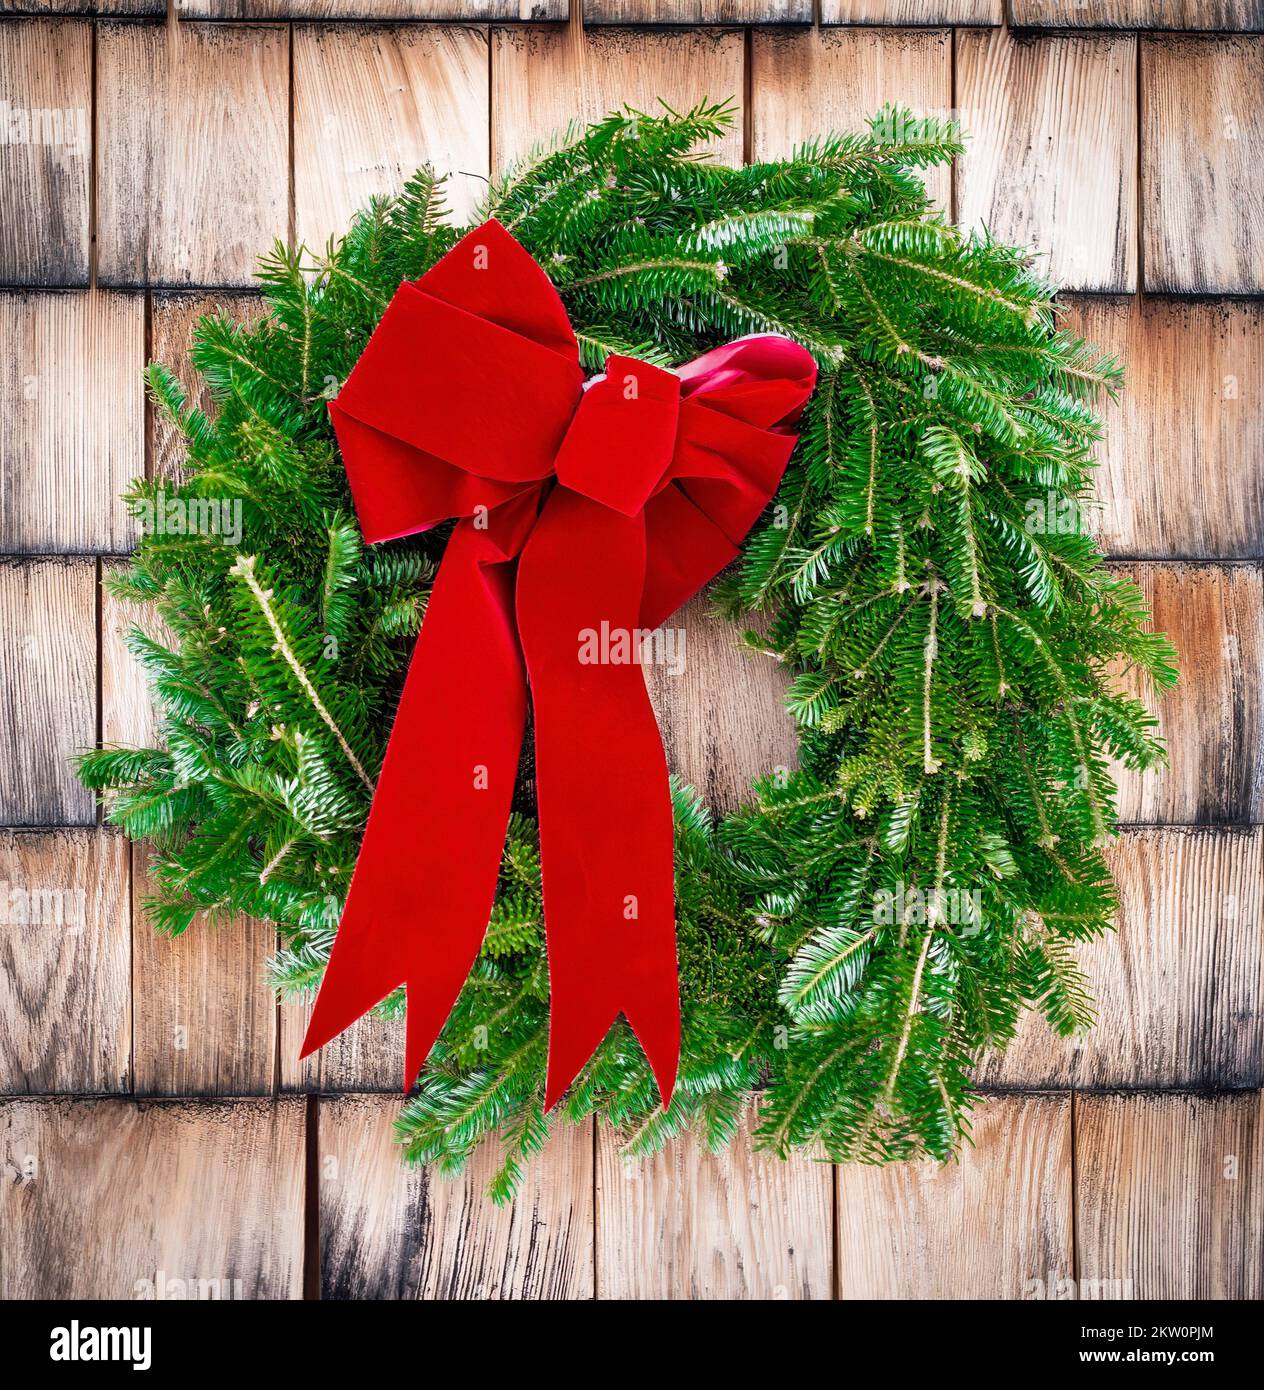 Pine needle Christmas wreath with big red bow on weathered cedar shake shingled house. Hint of snow. Rustic, natural, traditional country decoration. Stock Photo